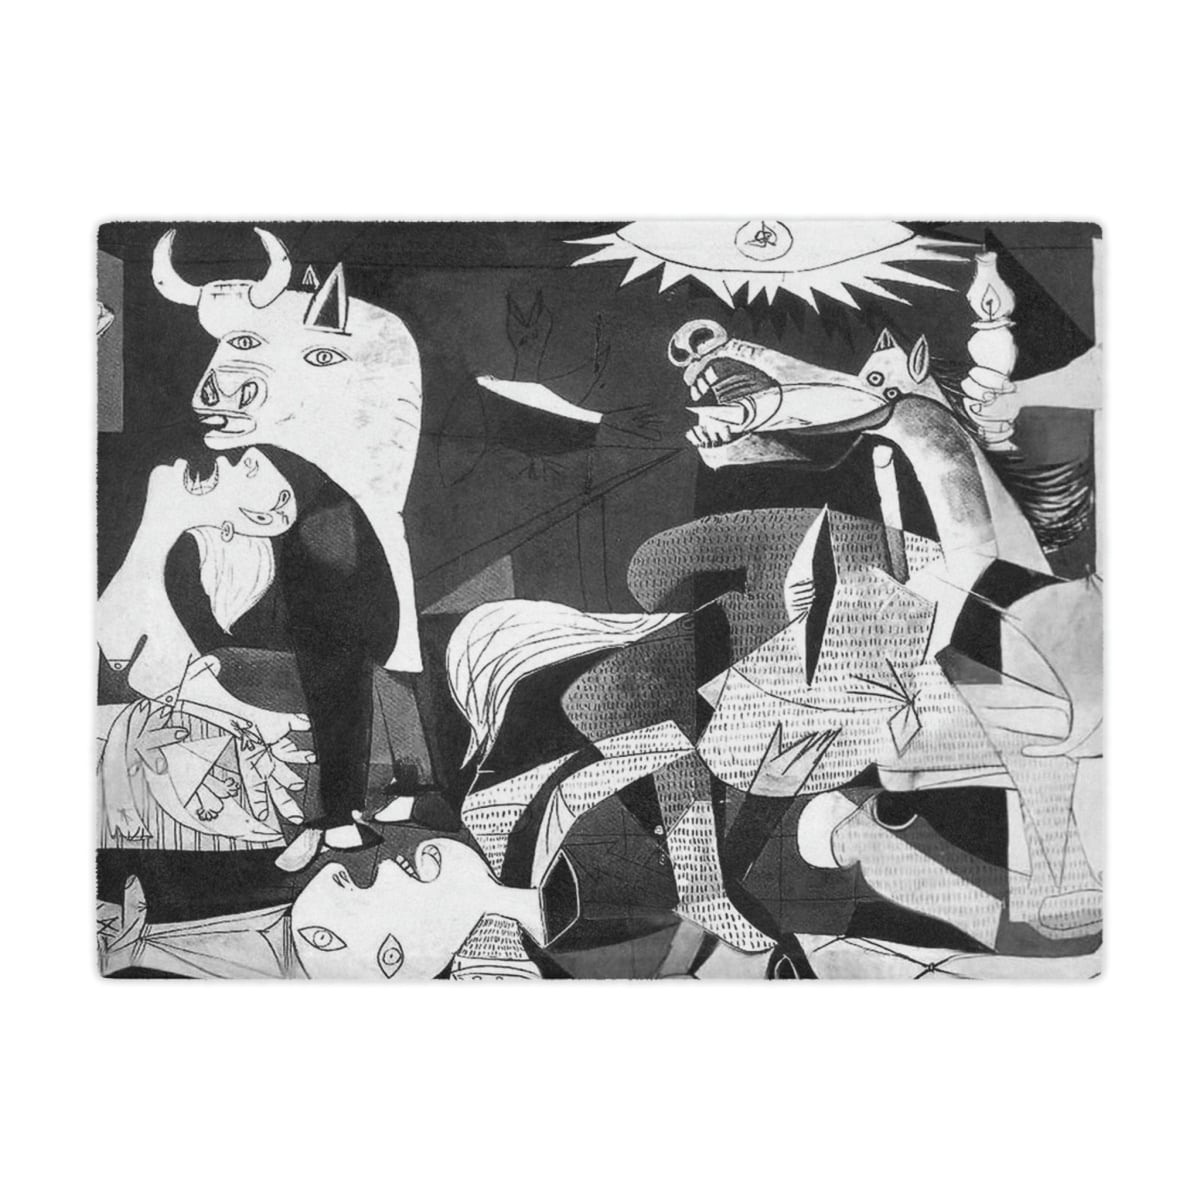 Pablo Picasso Guernica Art Blanket: Iconic Masterpiece for Your Home